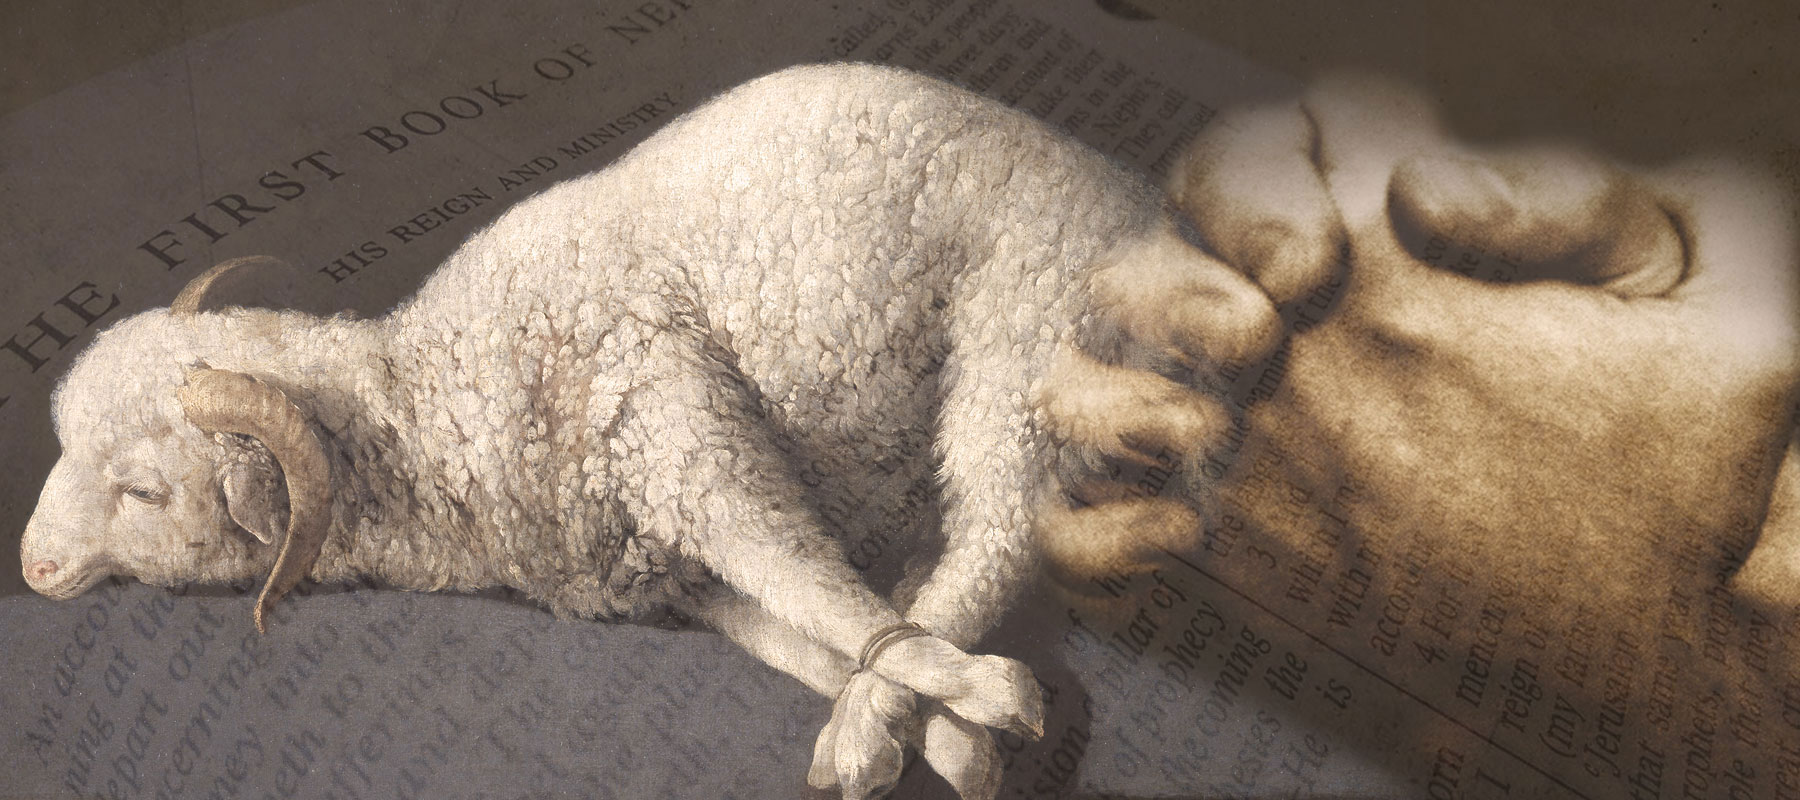 A collage of two images. On the left is a lamb bound at its feet lying down. At right is a pair of hands clasped in prayer.